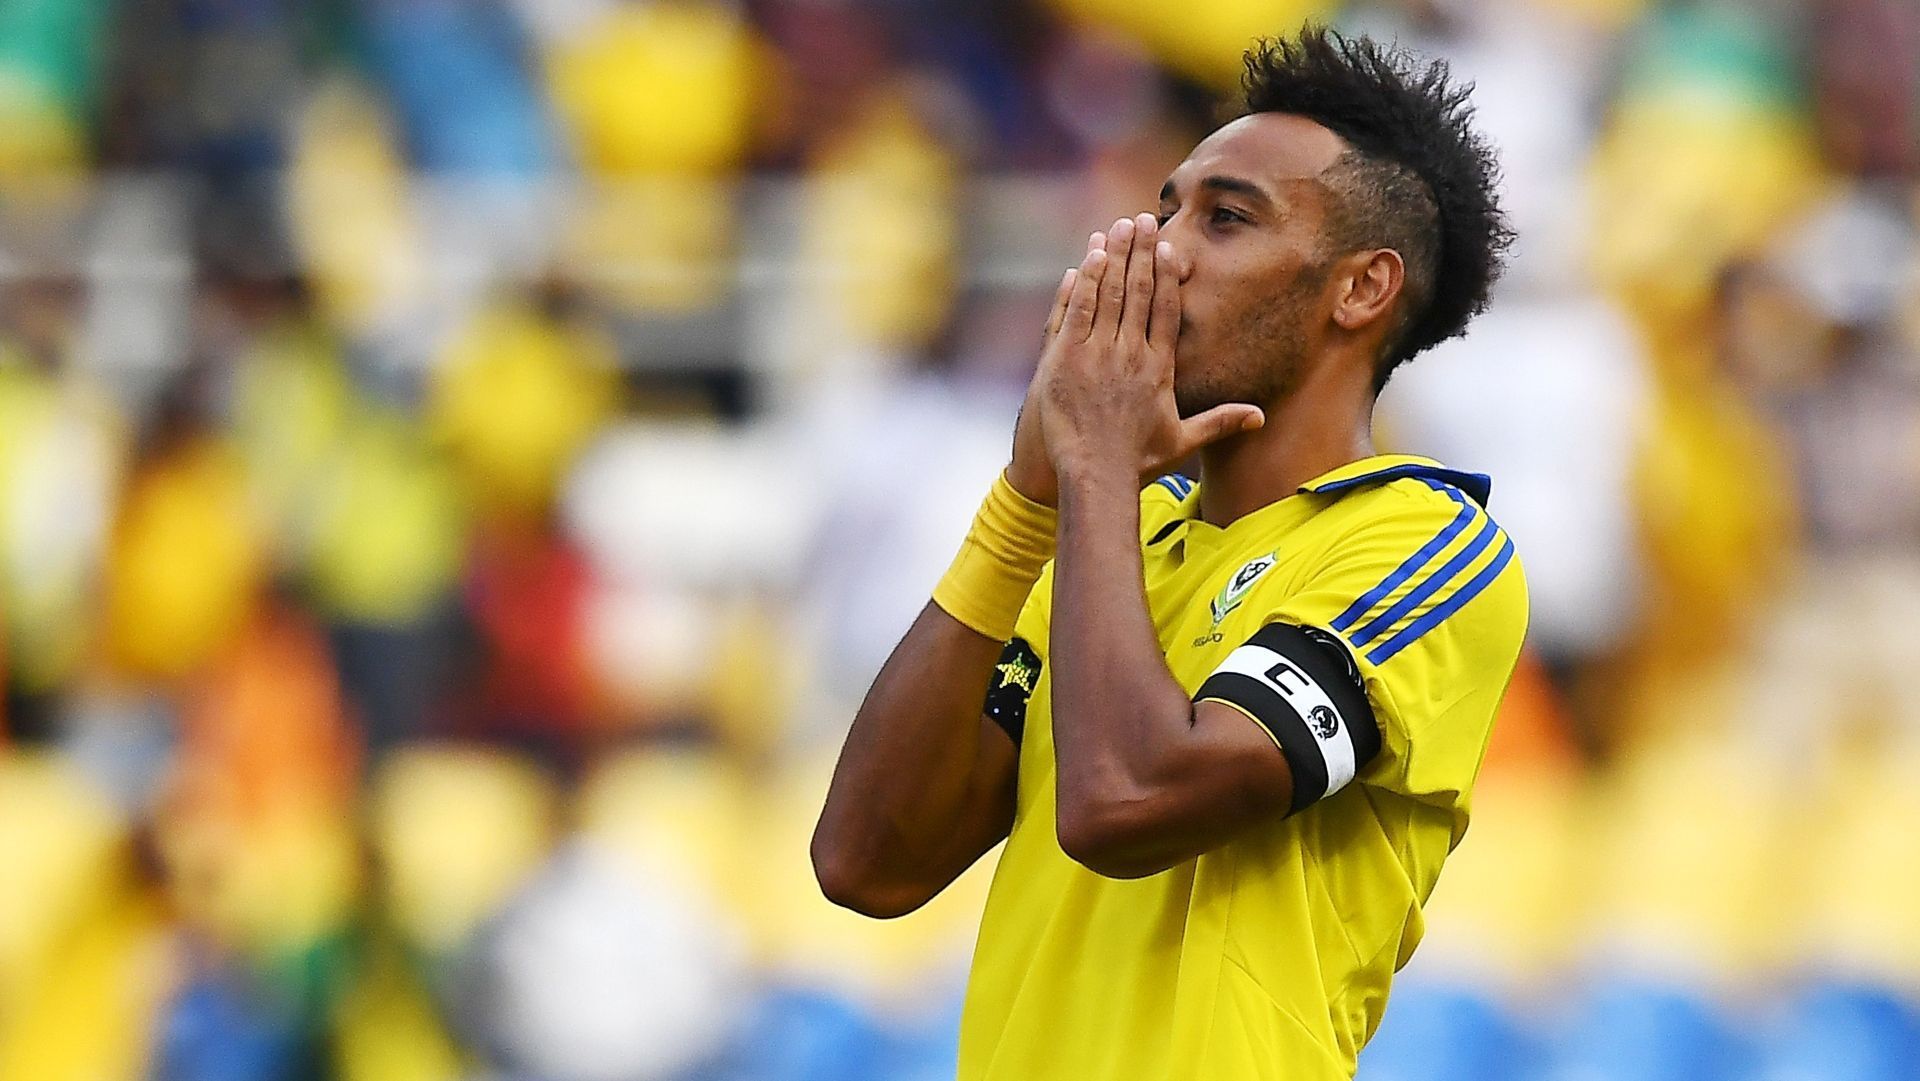 Gabon are back in FIFA World Cup qualification action on Friday against Libya